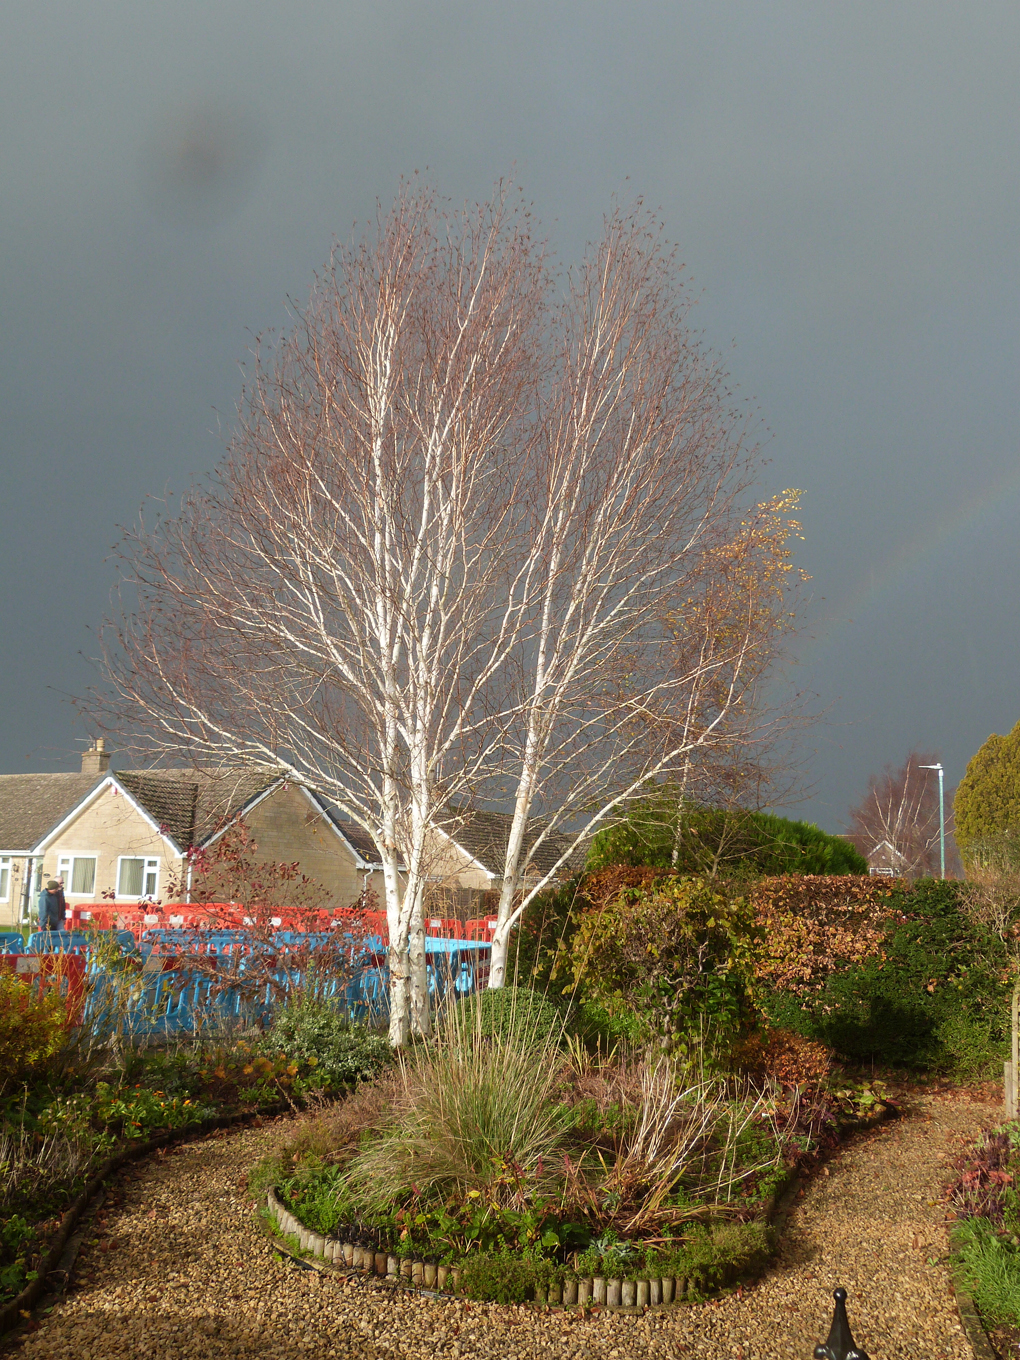 A sunlit birch against a dark sky with a hint of rainbow, plus the unending road works.